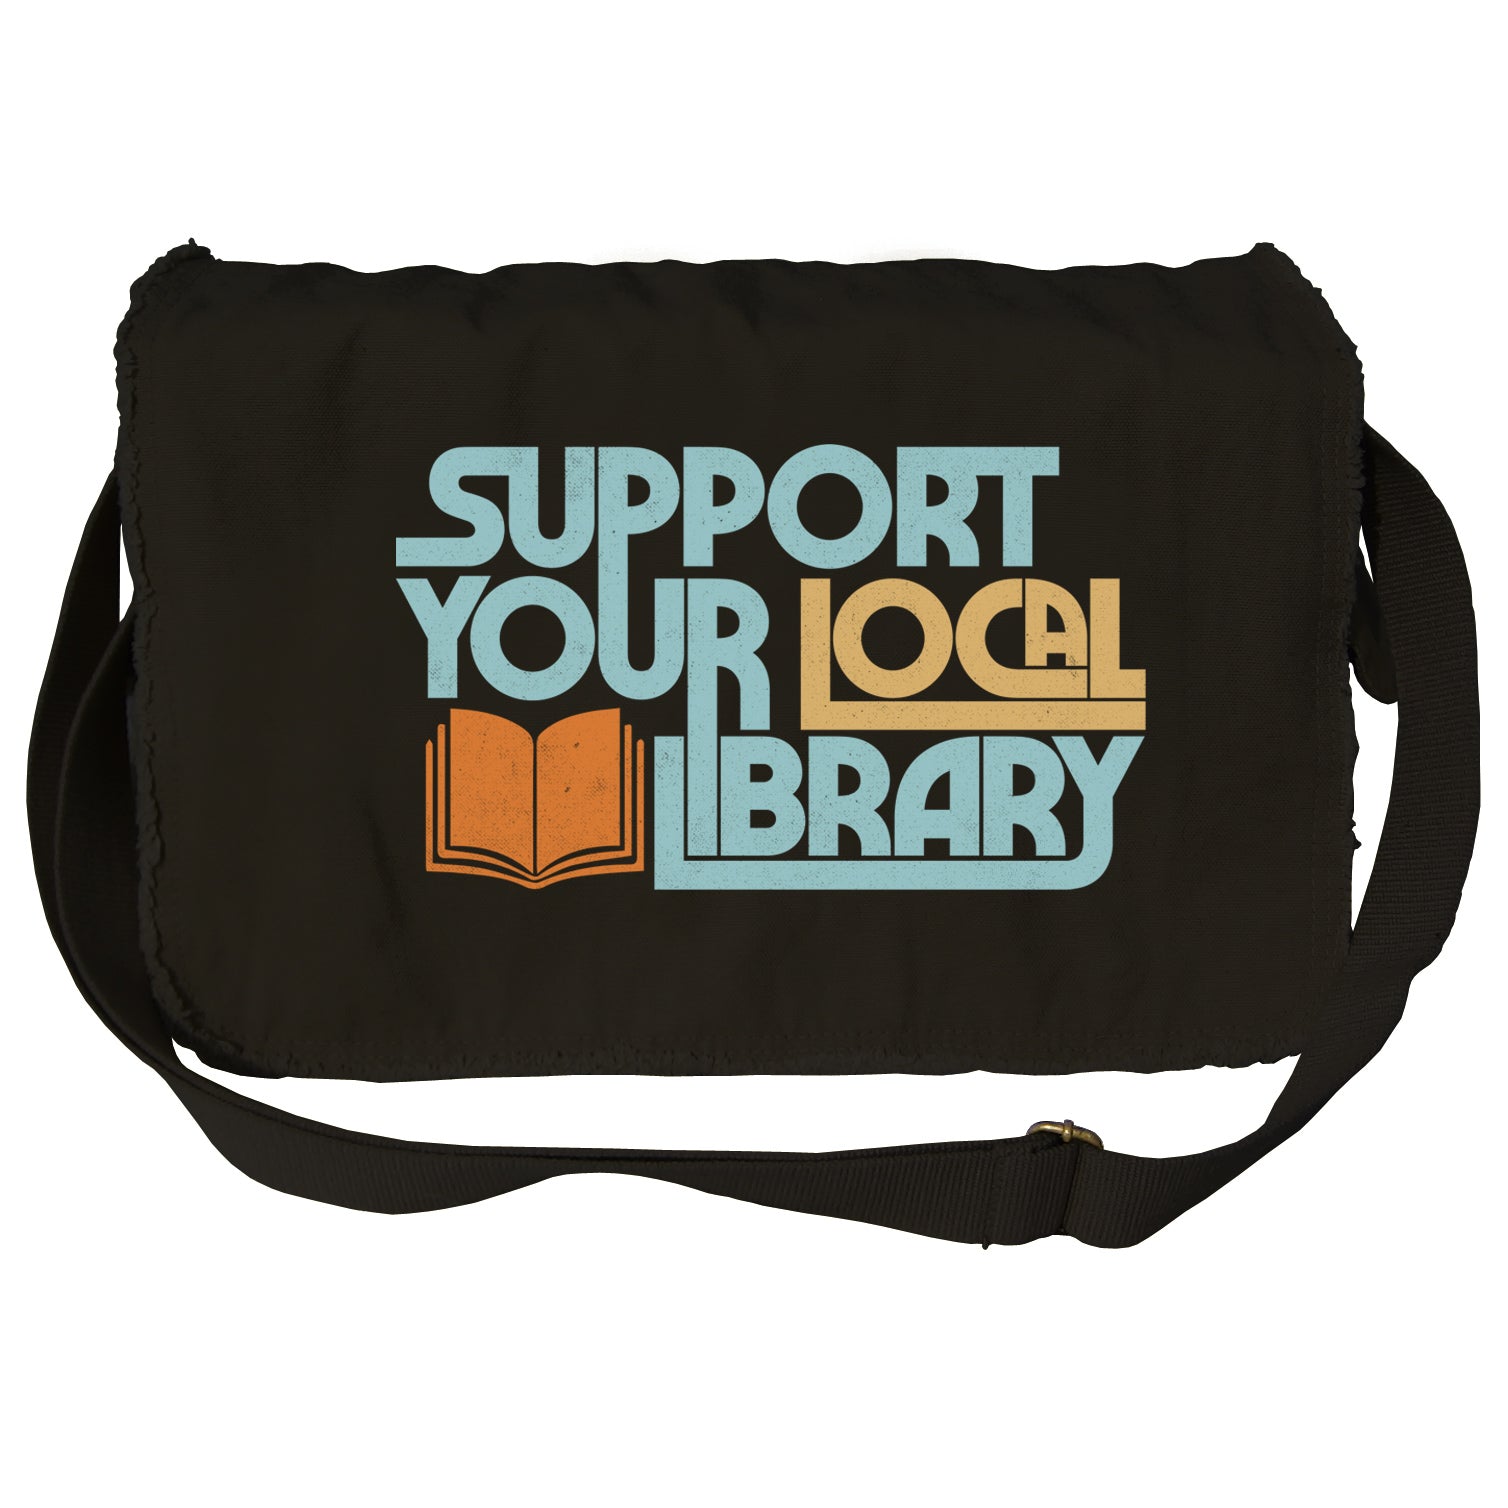 Support Your Local Library Messenger Bag